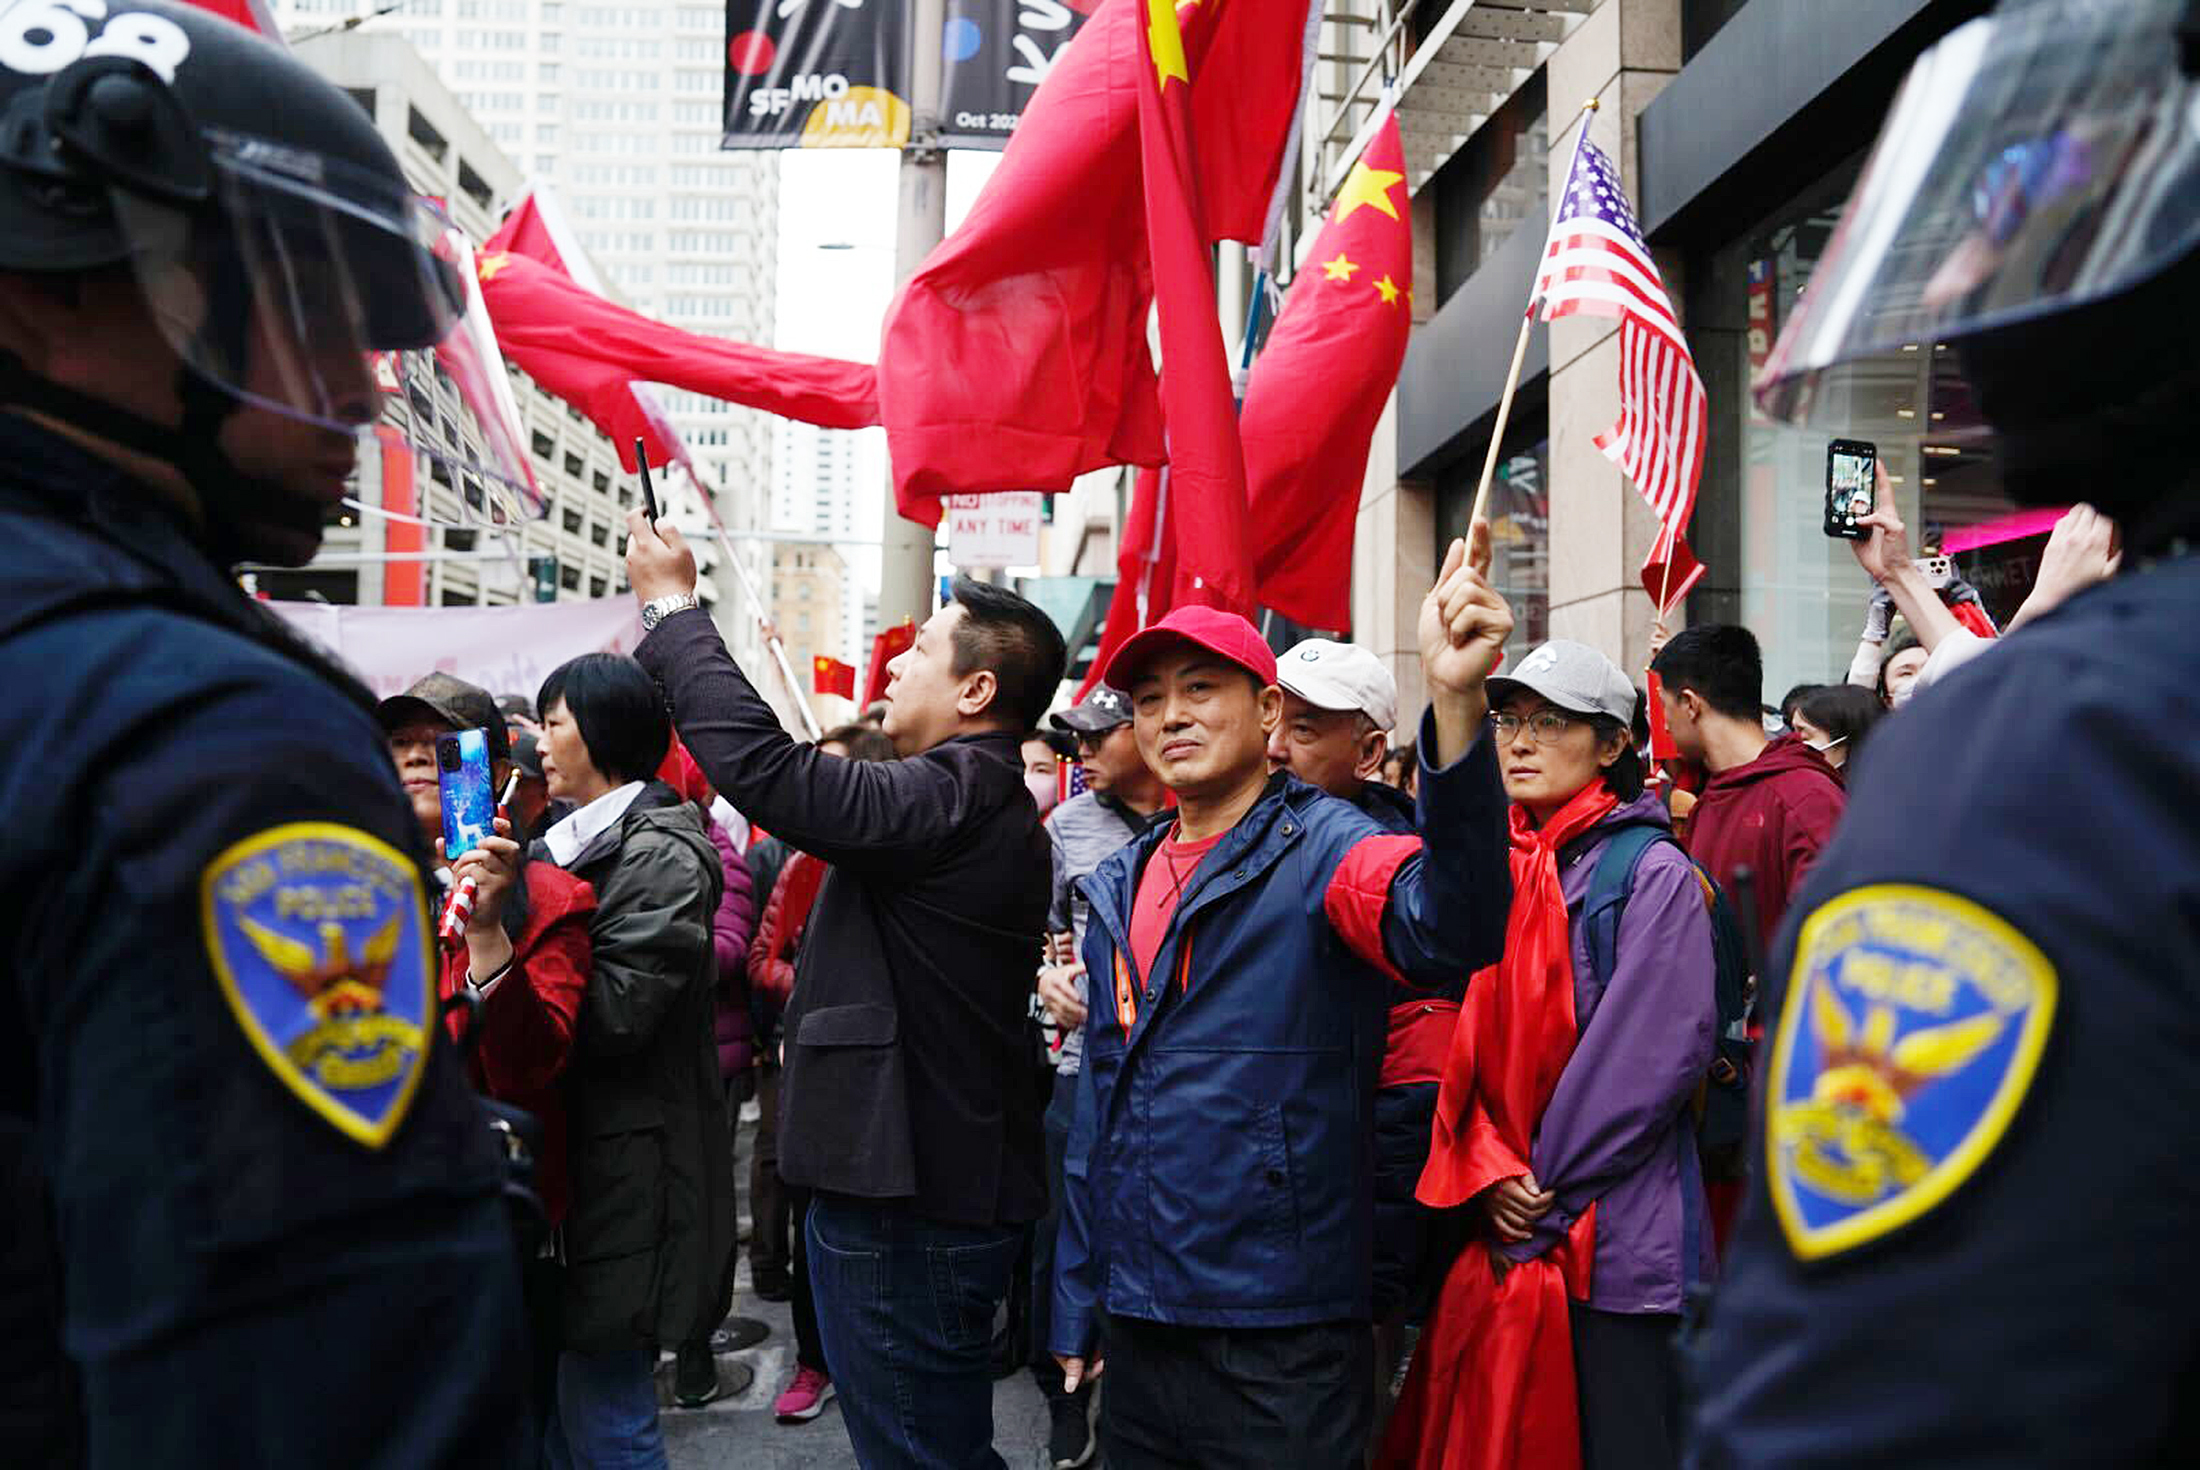 Two San Francisco Police Department officers stand near a rally that includes people waving Chinese flags.